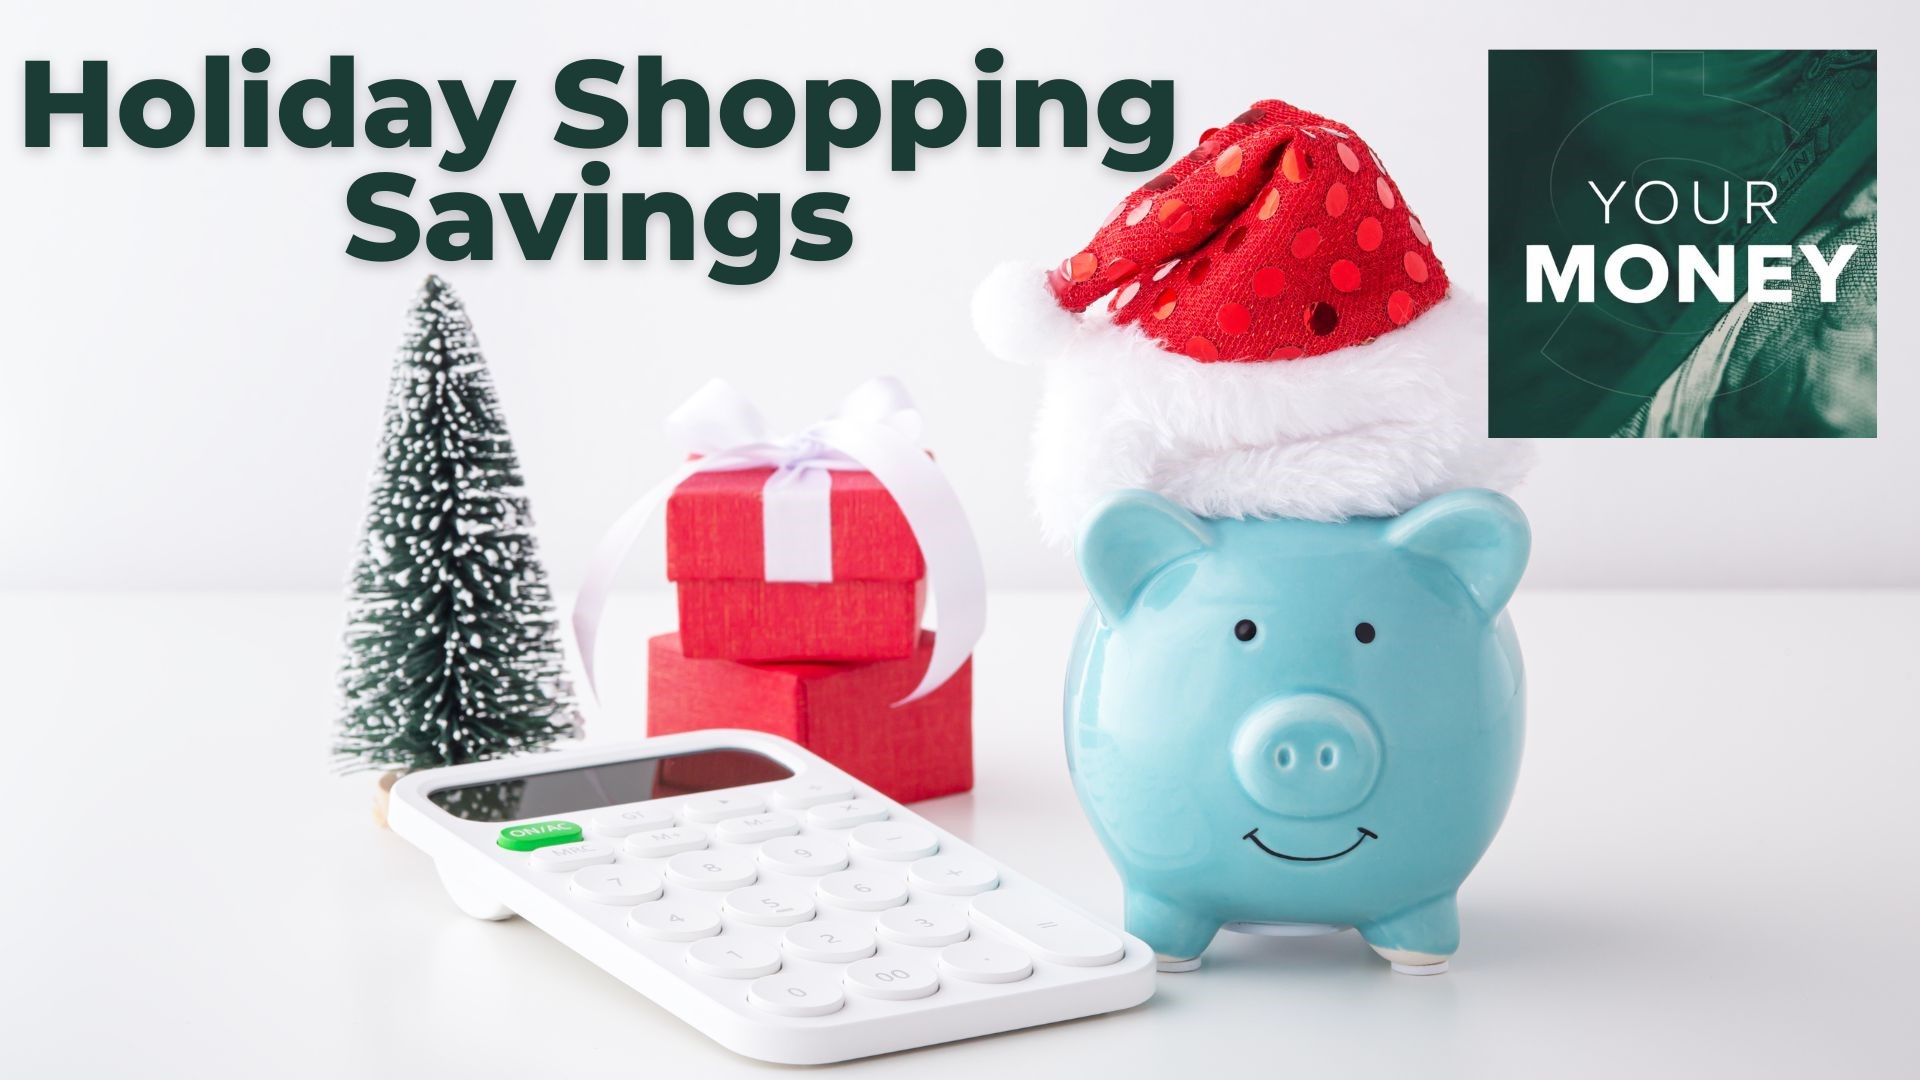 Your Money looks into ways to save this holiday season. From last minute deals to avoiding scammers, there are tips for all shoppers and consumers.